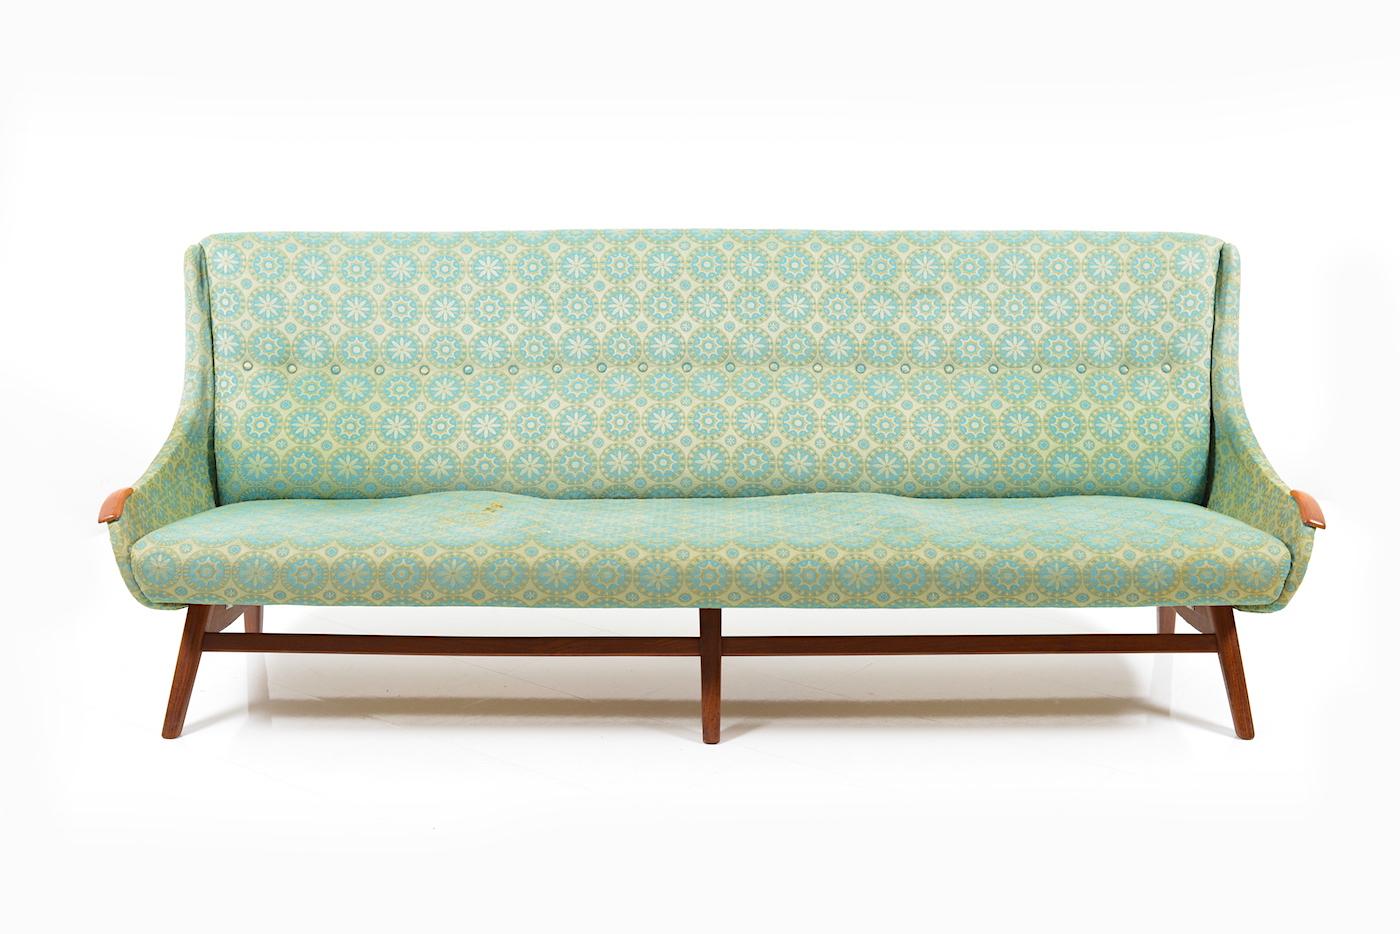 Unique four-seat sofa by the Danish designer and furniture maker Svend Skipper. This prototype has never gone into series and comes from the Private House of the Designer. Designed and manufactured in the early 1950s. Frame and armrests  in solid